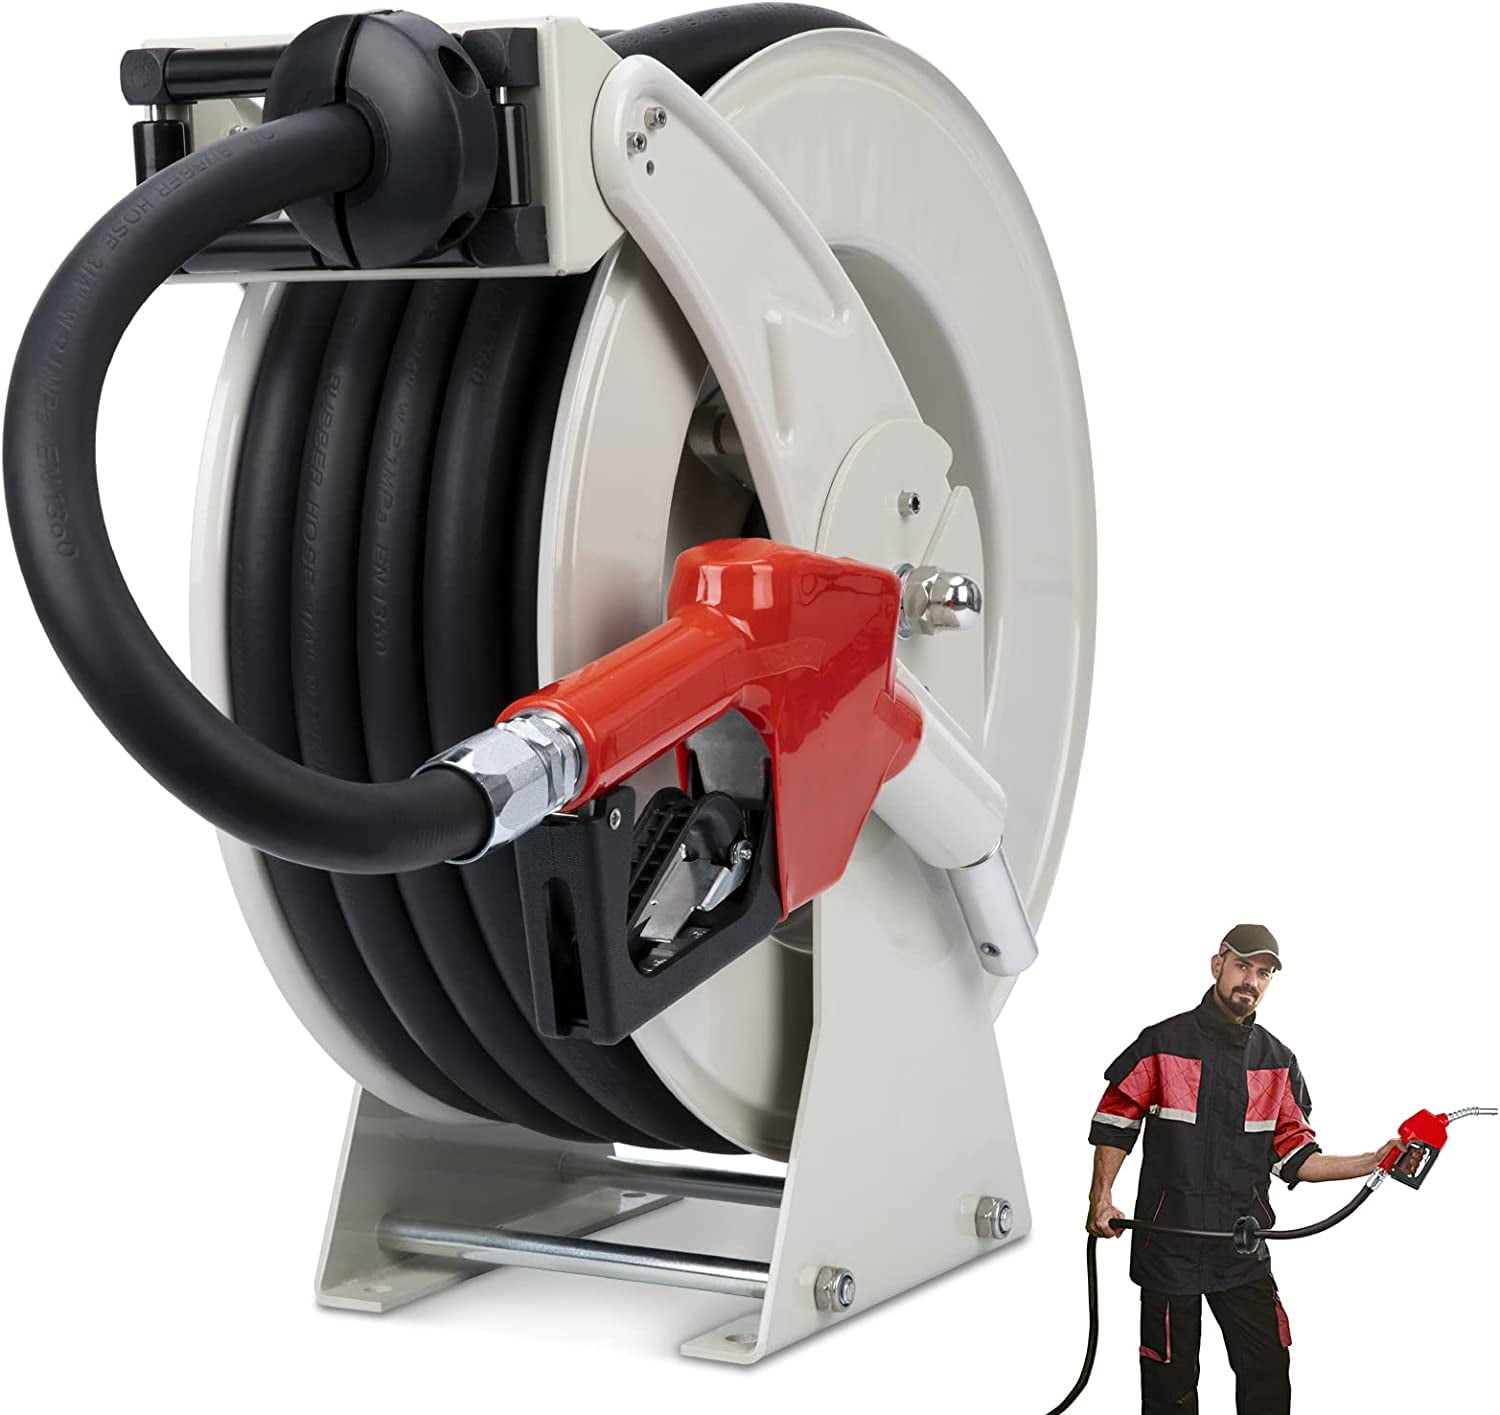 Rocita Diesel Fuel Hose Reel with Fueling Nozzle, 1 inch x 50 ft